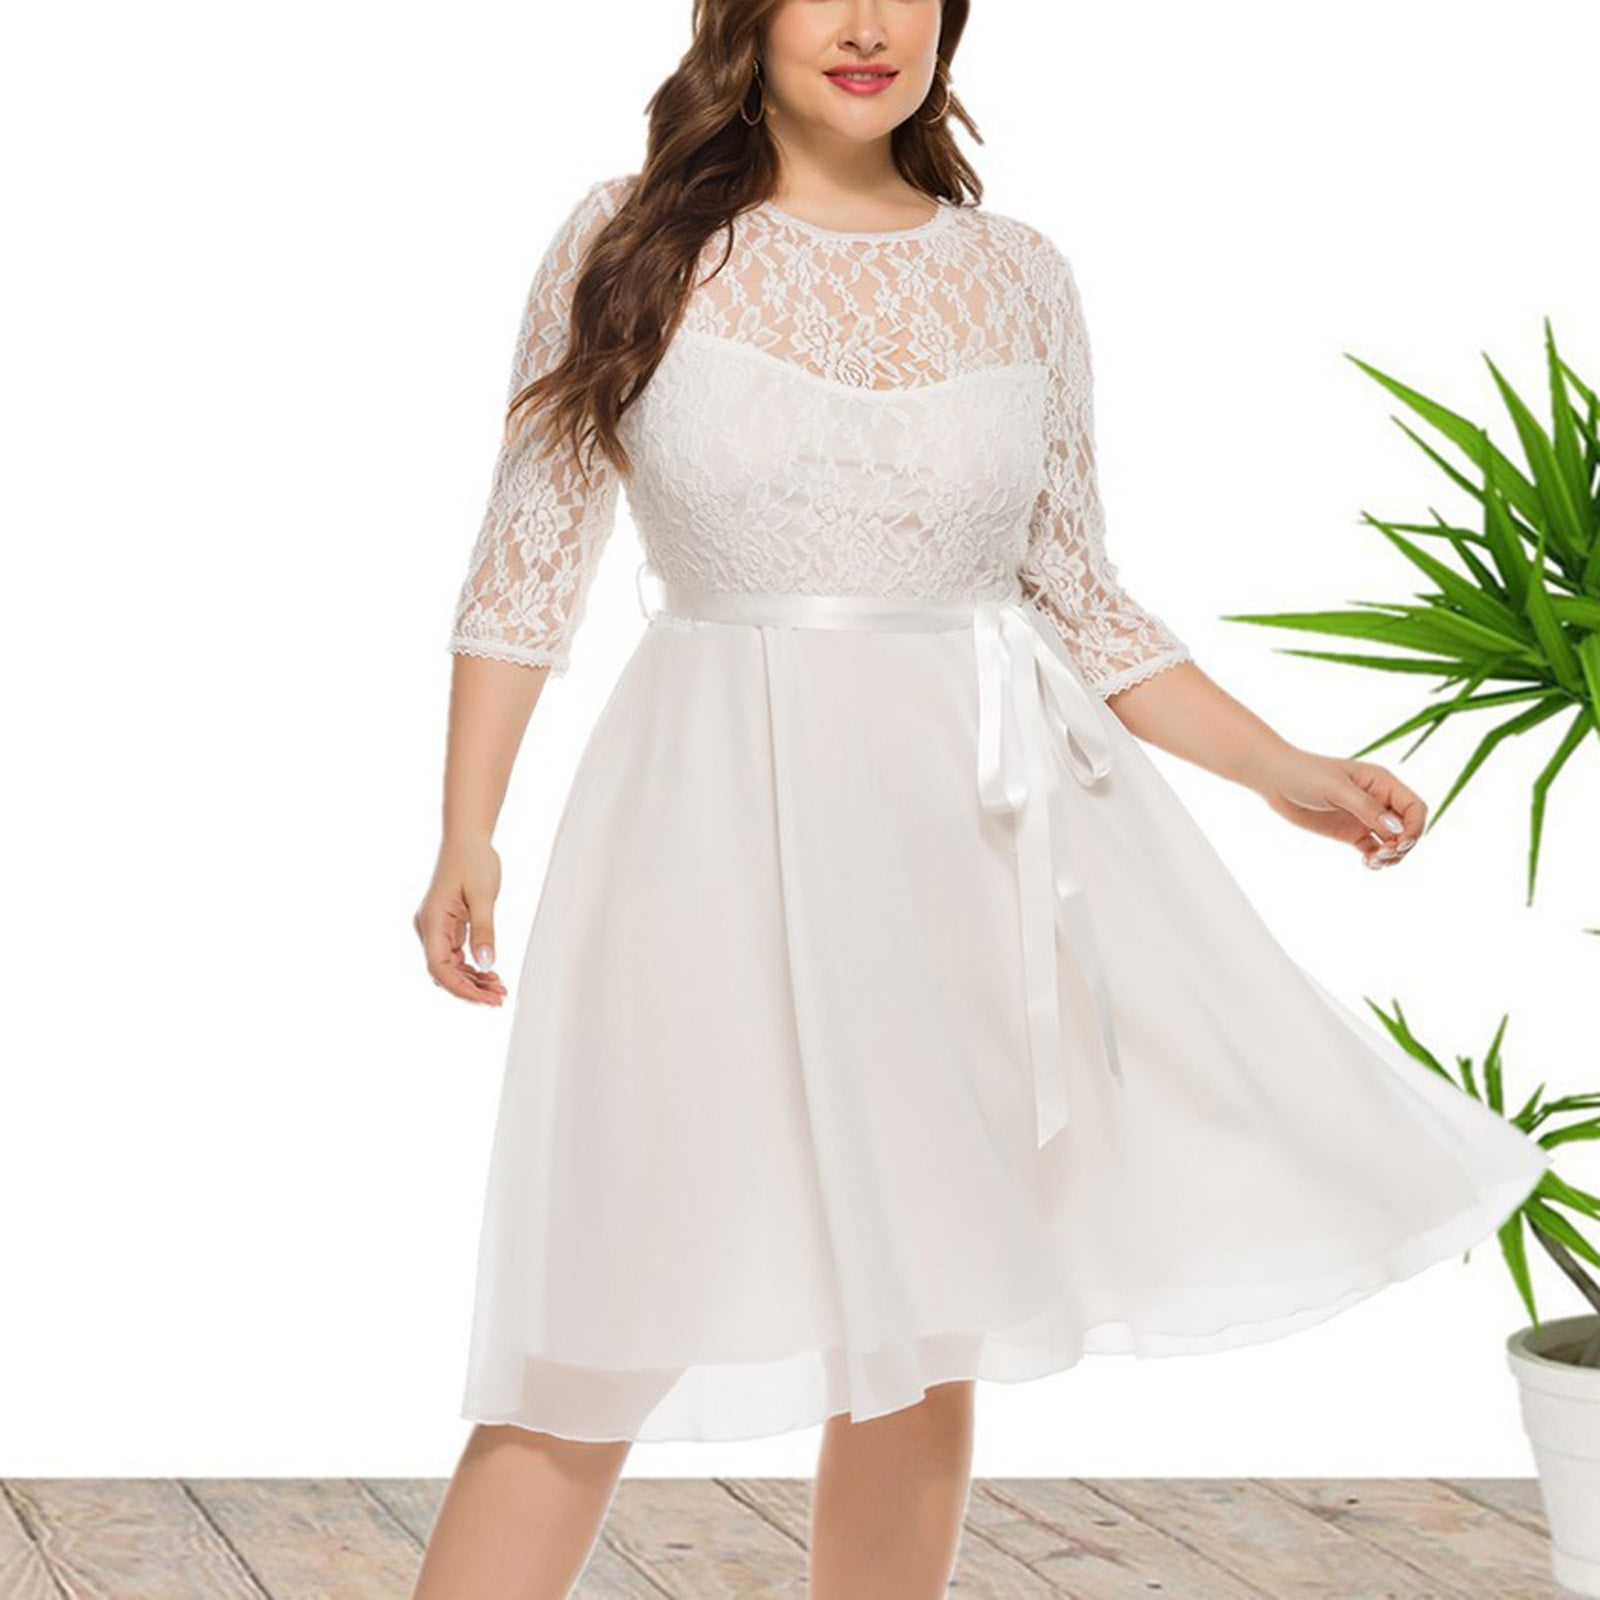 5 Plus Size Wedding Gowns for Modern, Non-Traditional Brides